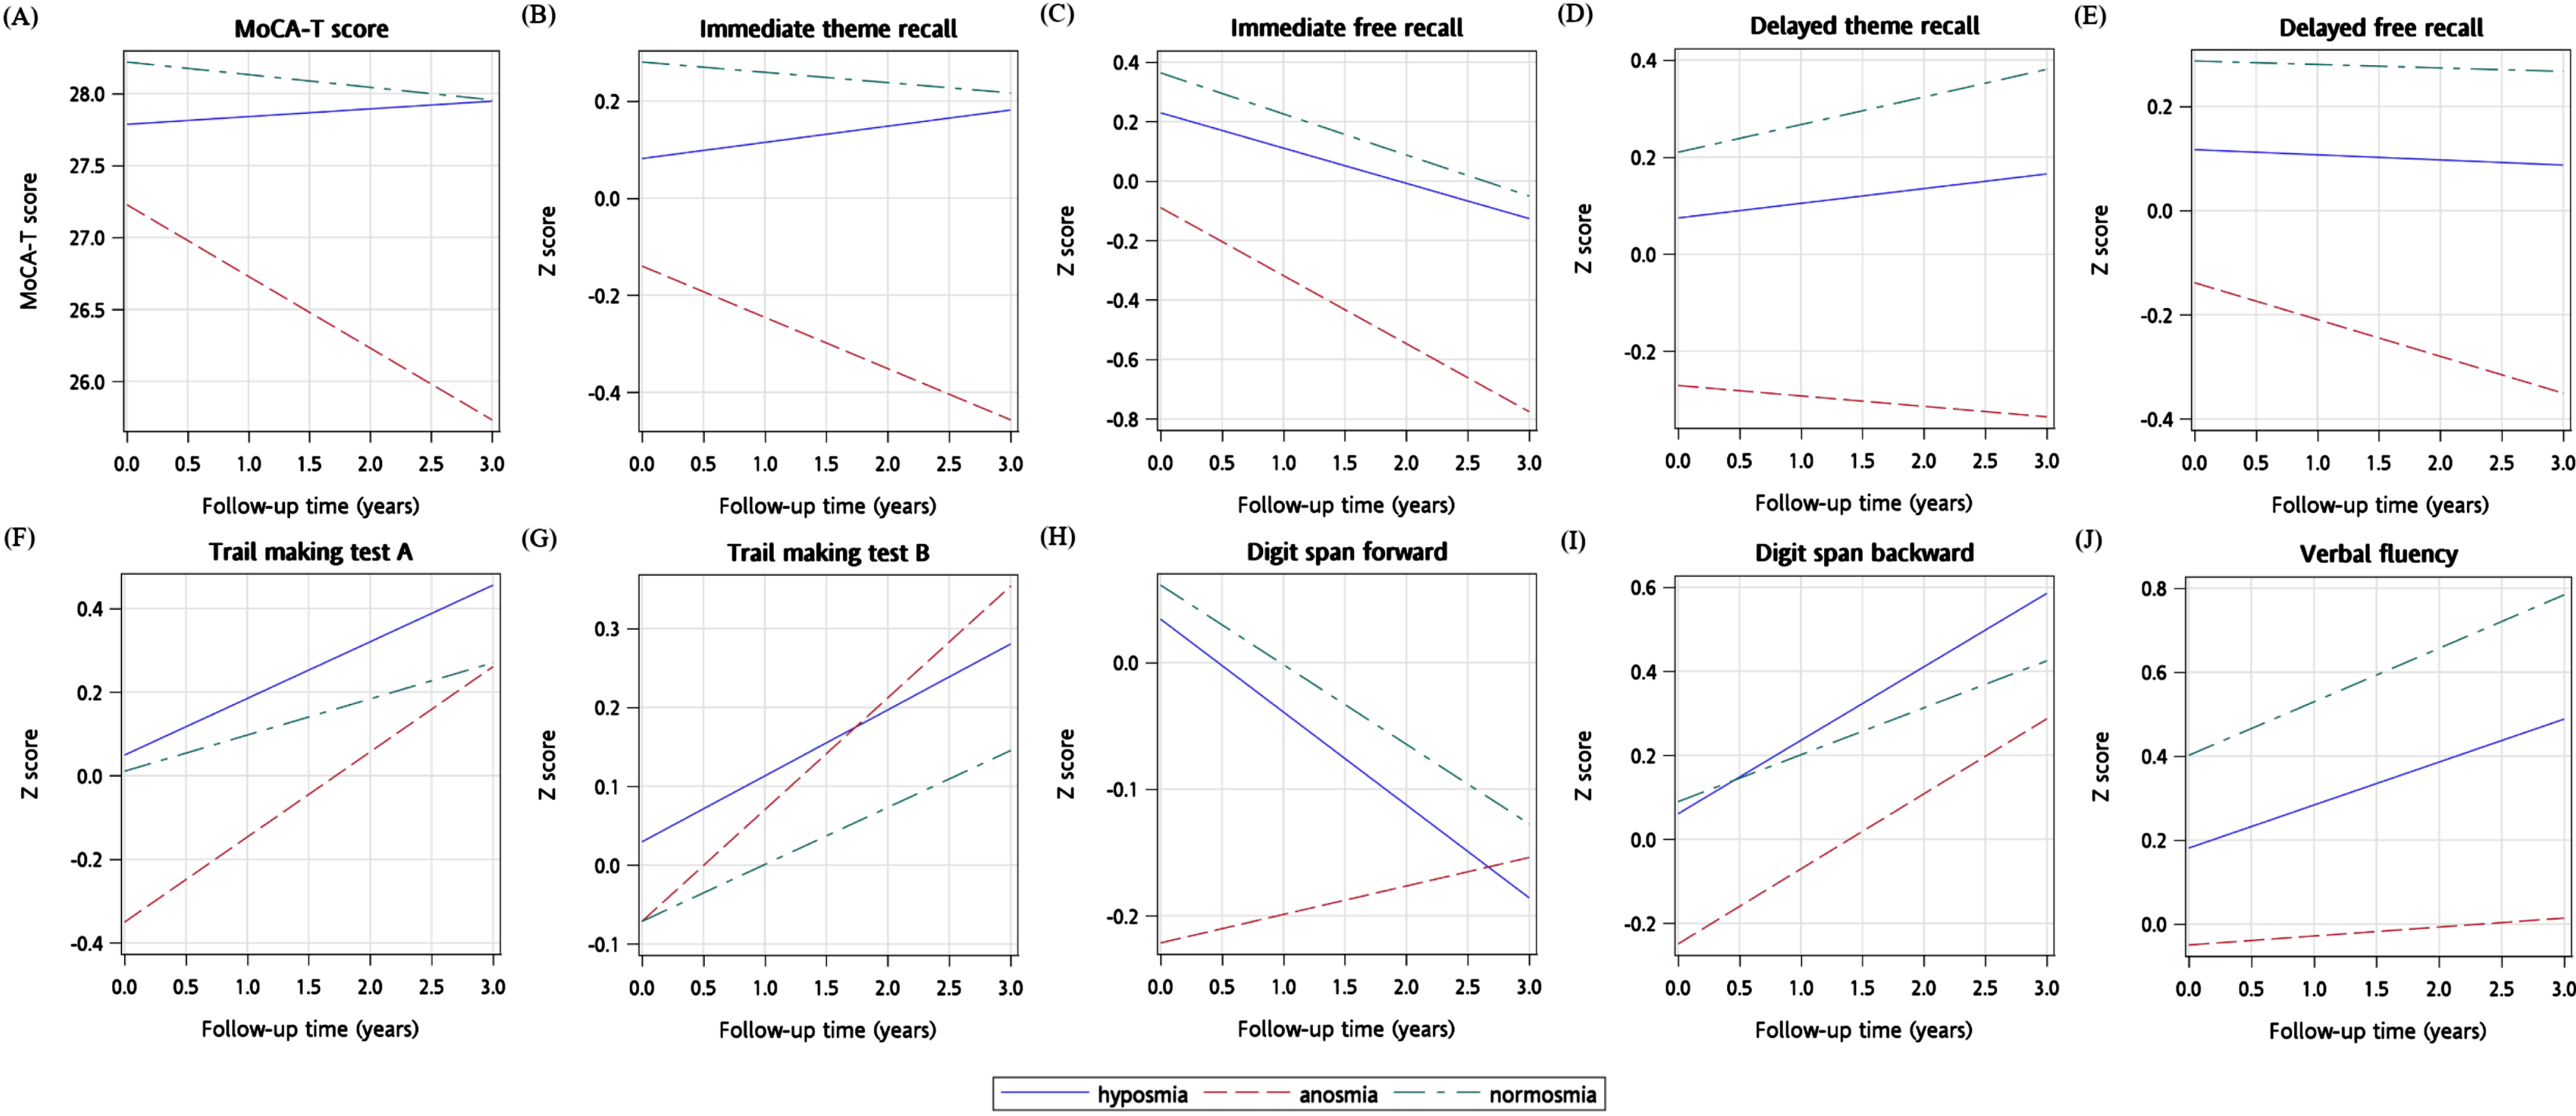 The sliced fit plots (A to J) illustrating predicted cognitive scores over time by olfactory status (normosmia, hyposmia, and anosmia). Plots generated using multivariable adjusted models with the covariates listed in Table 2, Footnotes a-j.